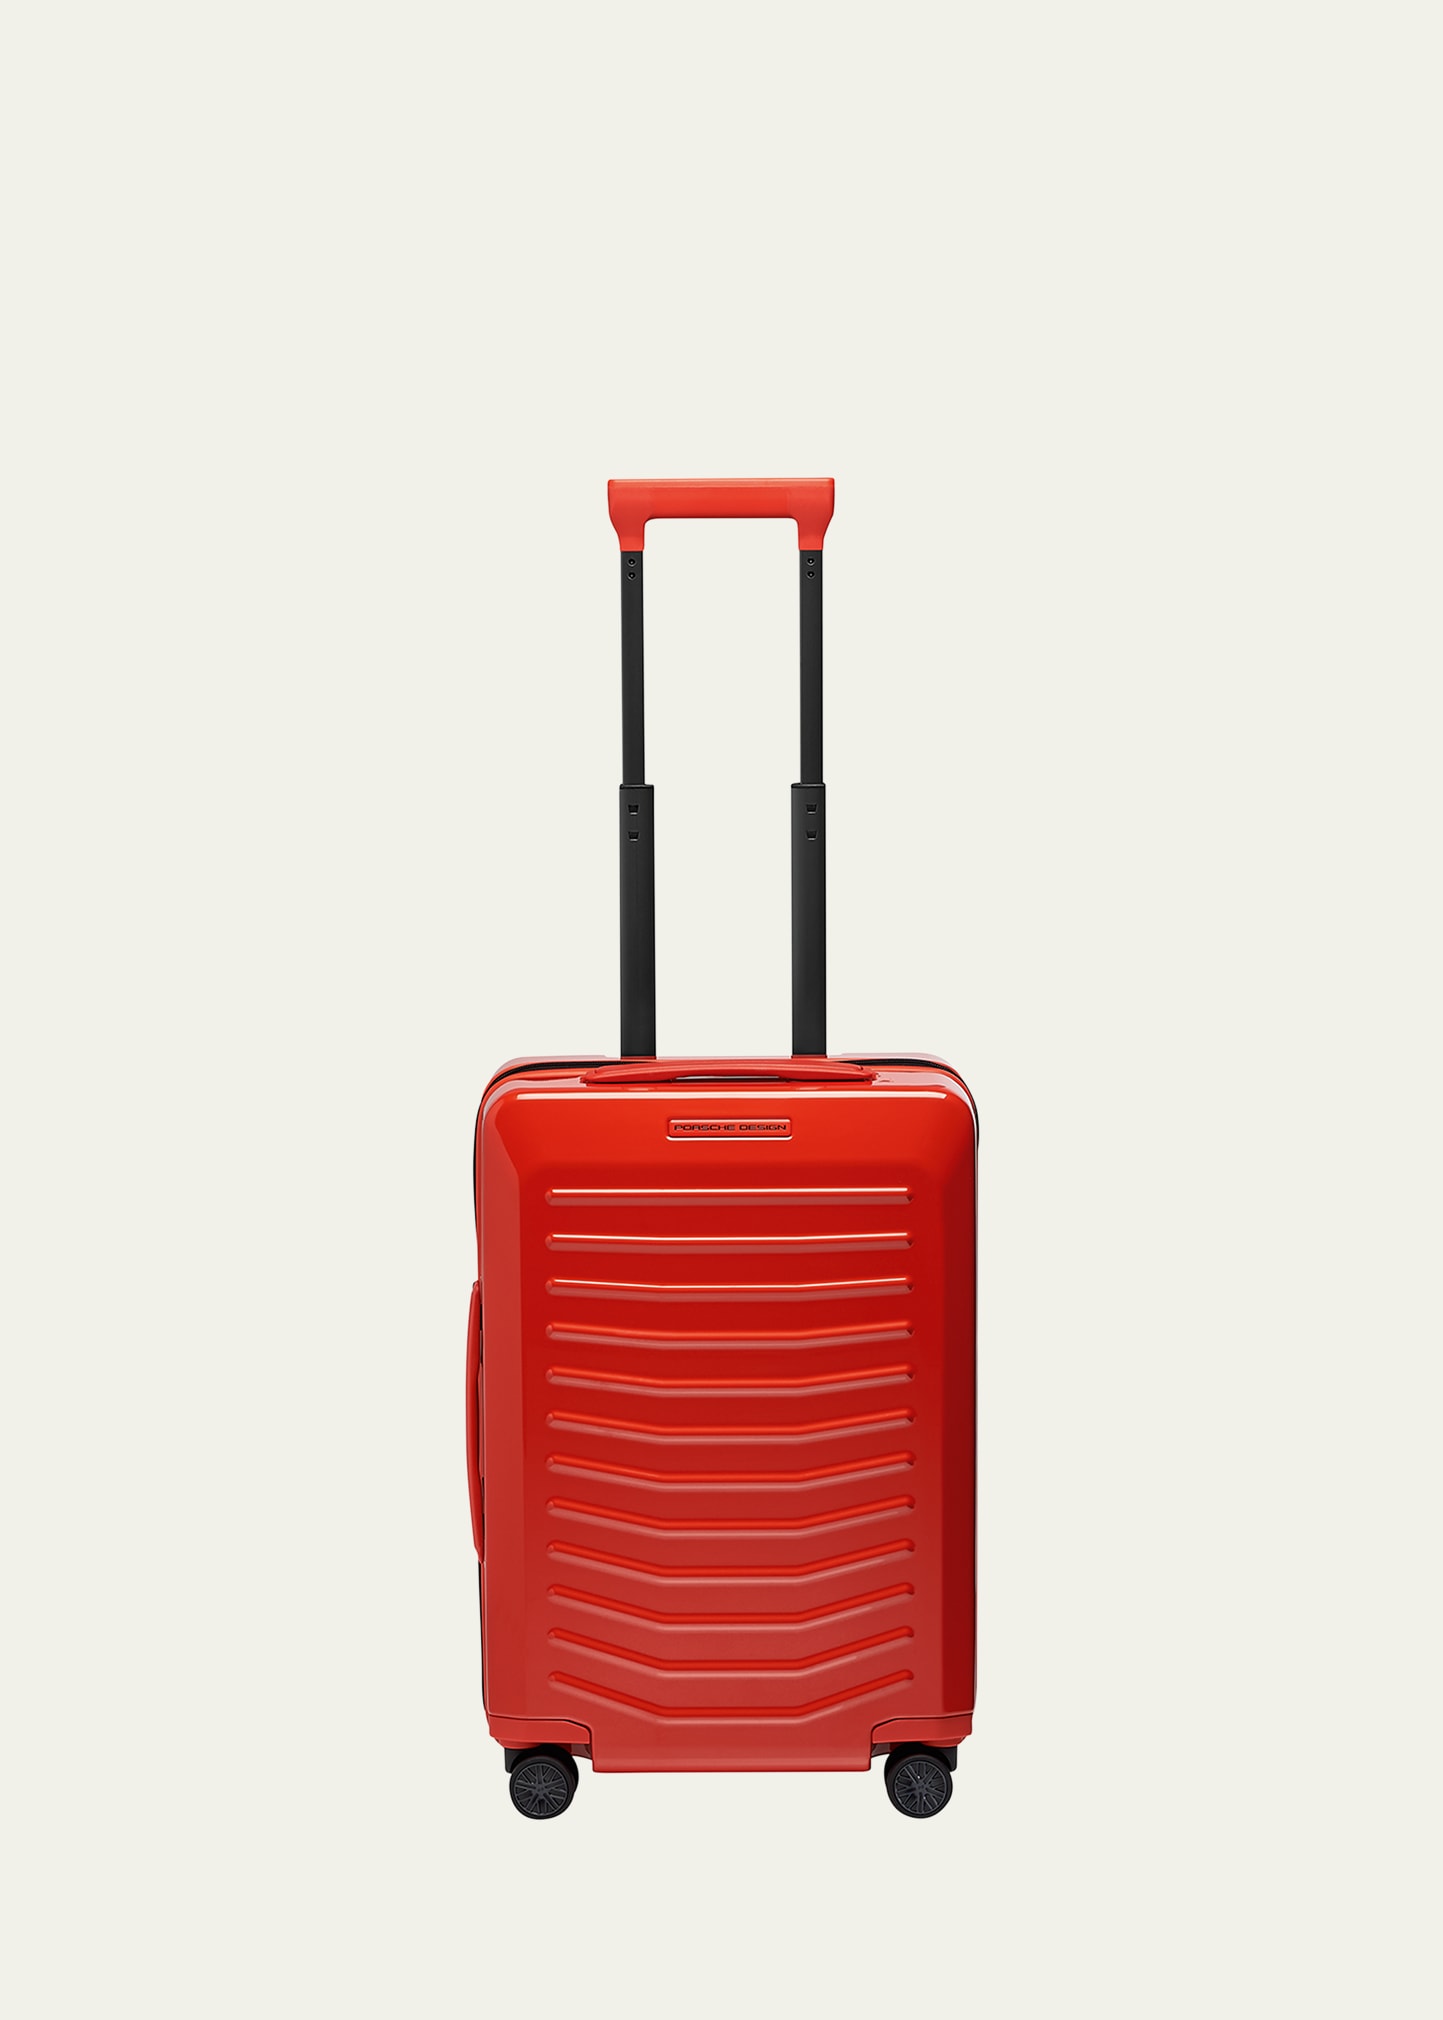 Roadster 21" Carry-On Spinner Luggage